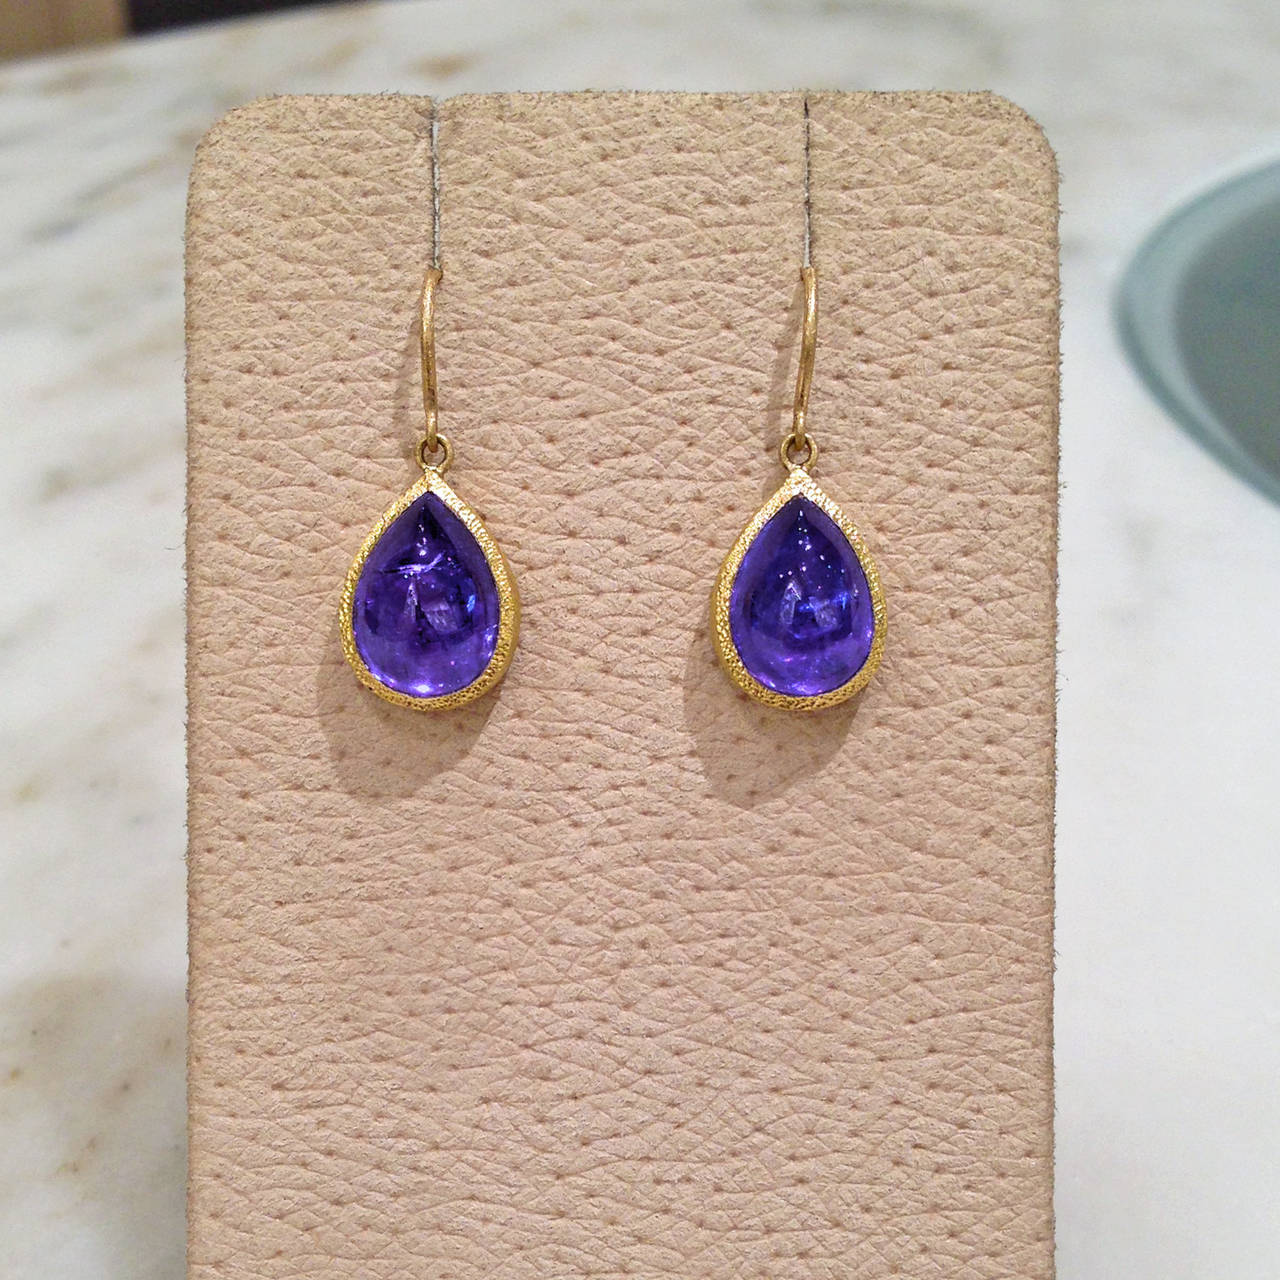 One-of-a-Kind Earrings handcrafted in 22k yellow gold with violetish-blue pear-shaped tanzanite cabochons. Incredible color.